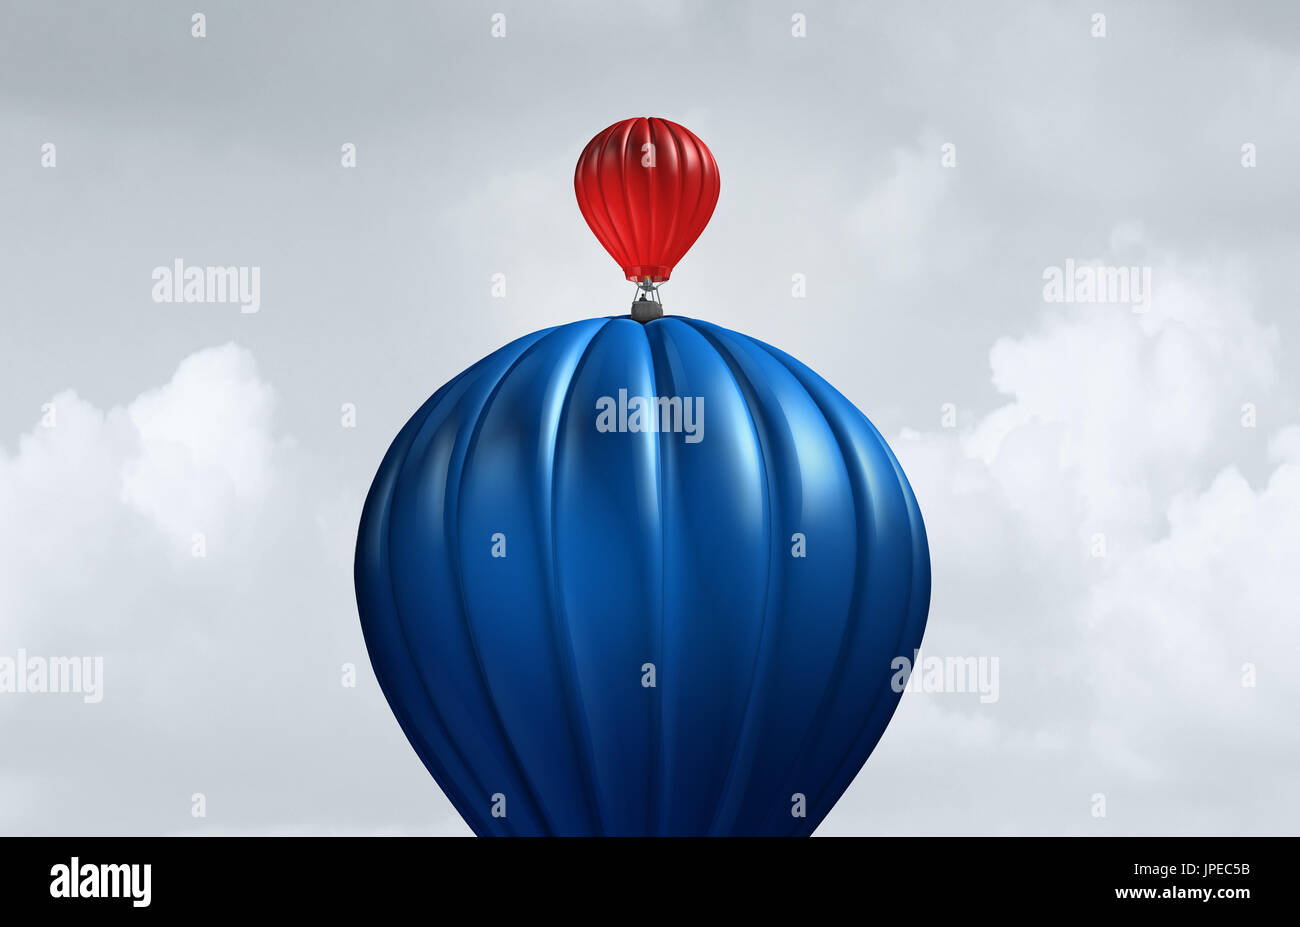 Big business assistance and support financial and corporate concept as a large air balloon lifting up a small entity as a symbol for investment. Stock Photo